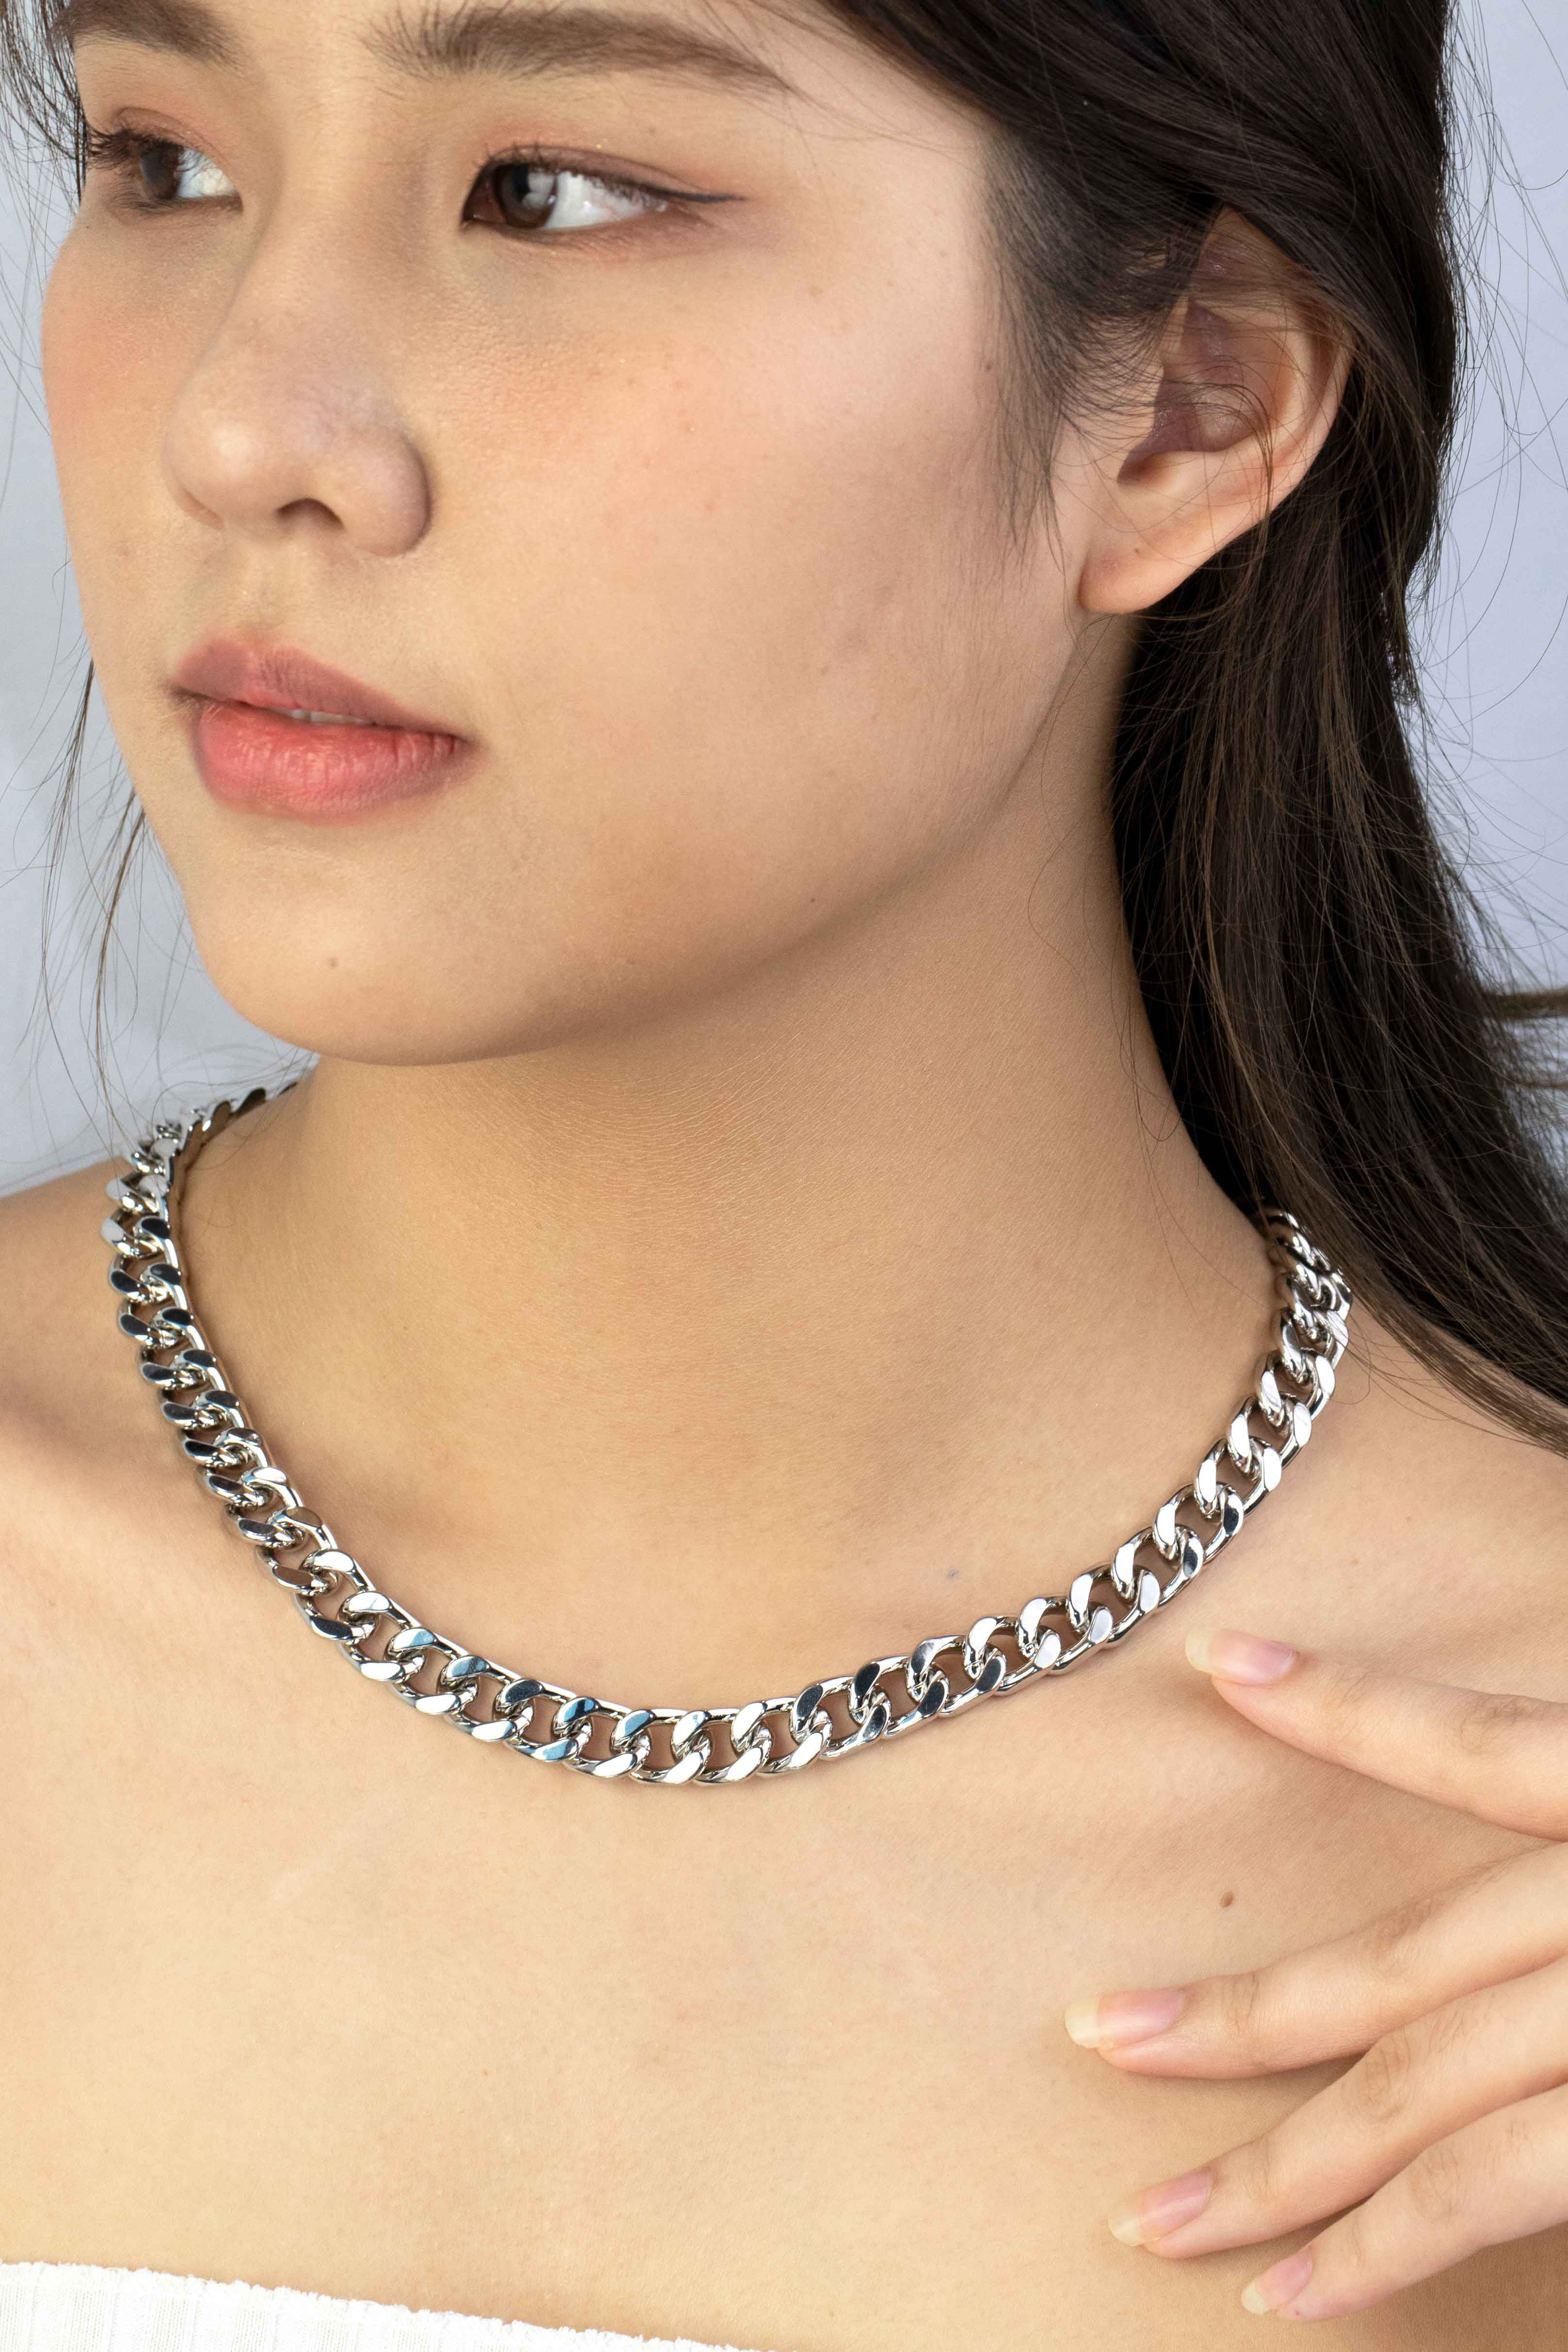 Silver and Gold Curb Chain Necklace, Shackle Chunky Necklace, Stainles – A  Girls Gems